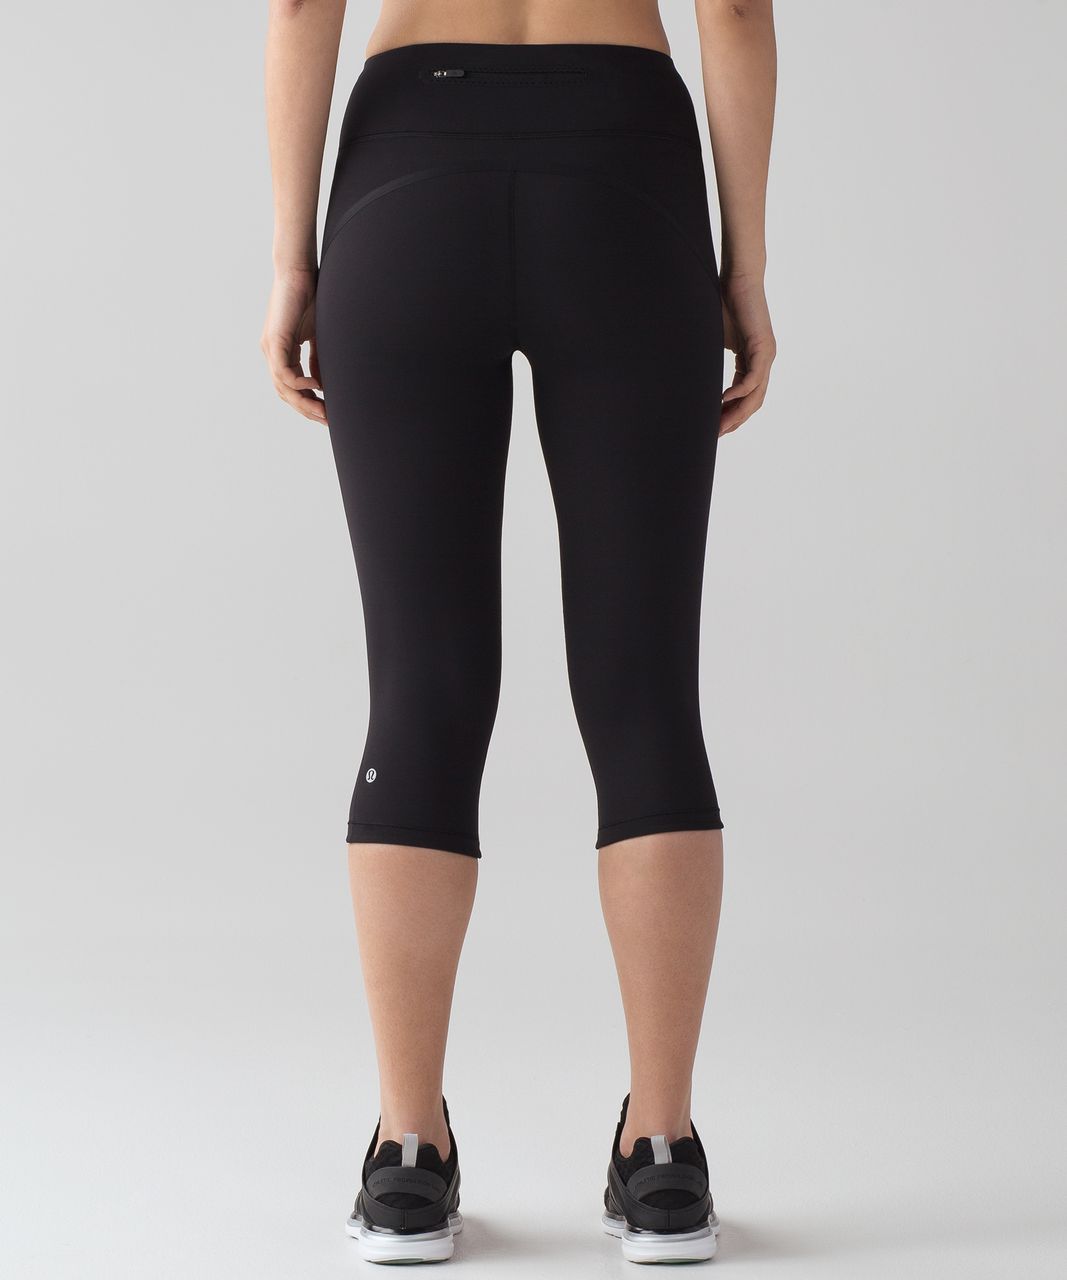 lululemon Southeast Asia - Our sleek, sweat-wicking Nulux™ fabric gives you  a fast, free and fluid feeling to provide a smooth stride for every way you  run. Feel the freedom of lightweight